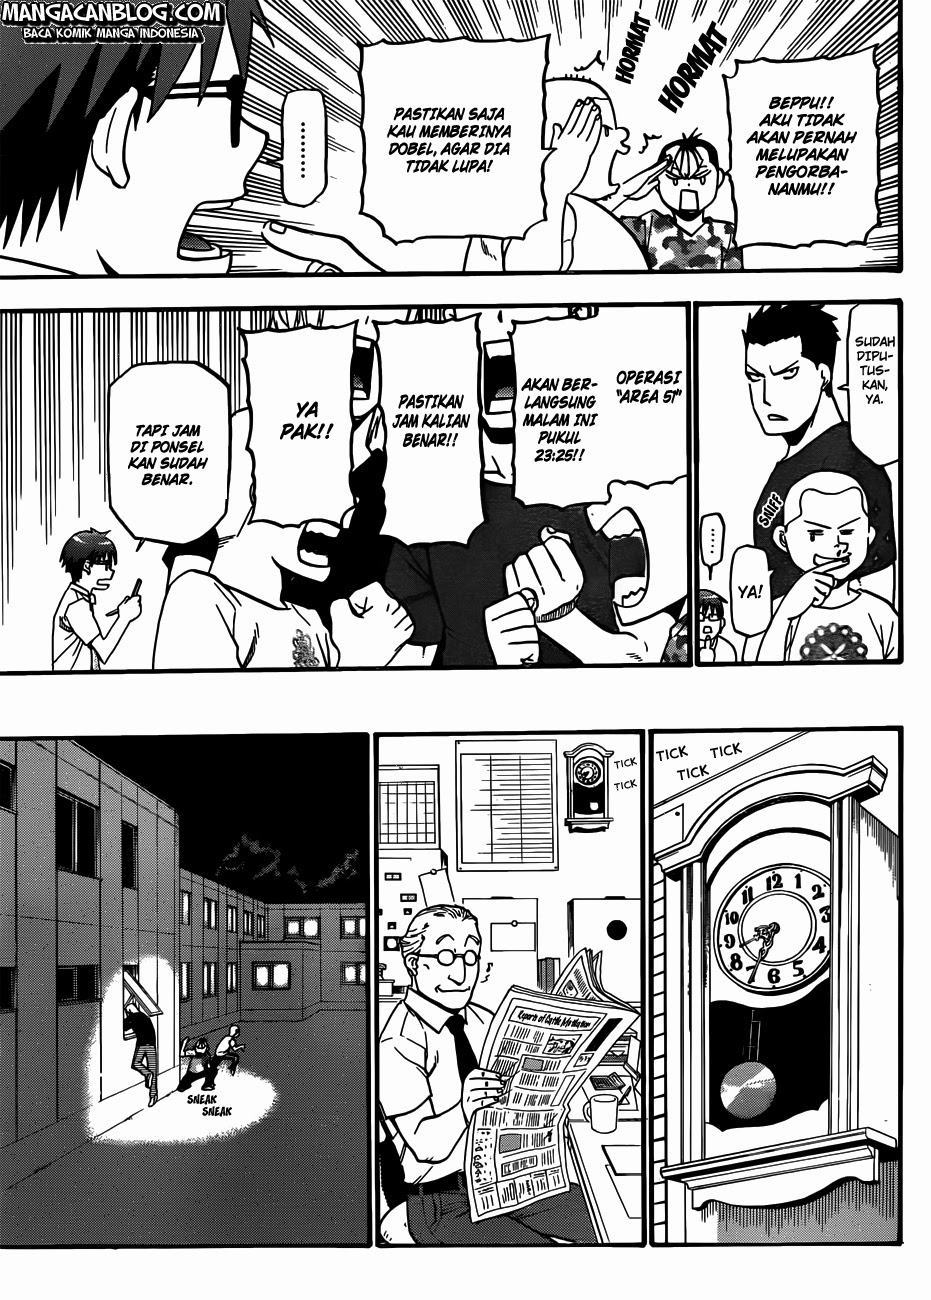 Silver Spoon Chapter 30